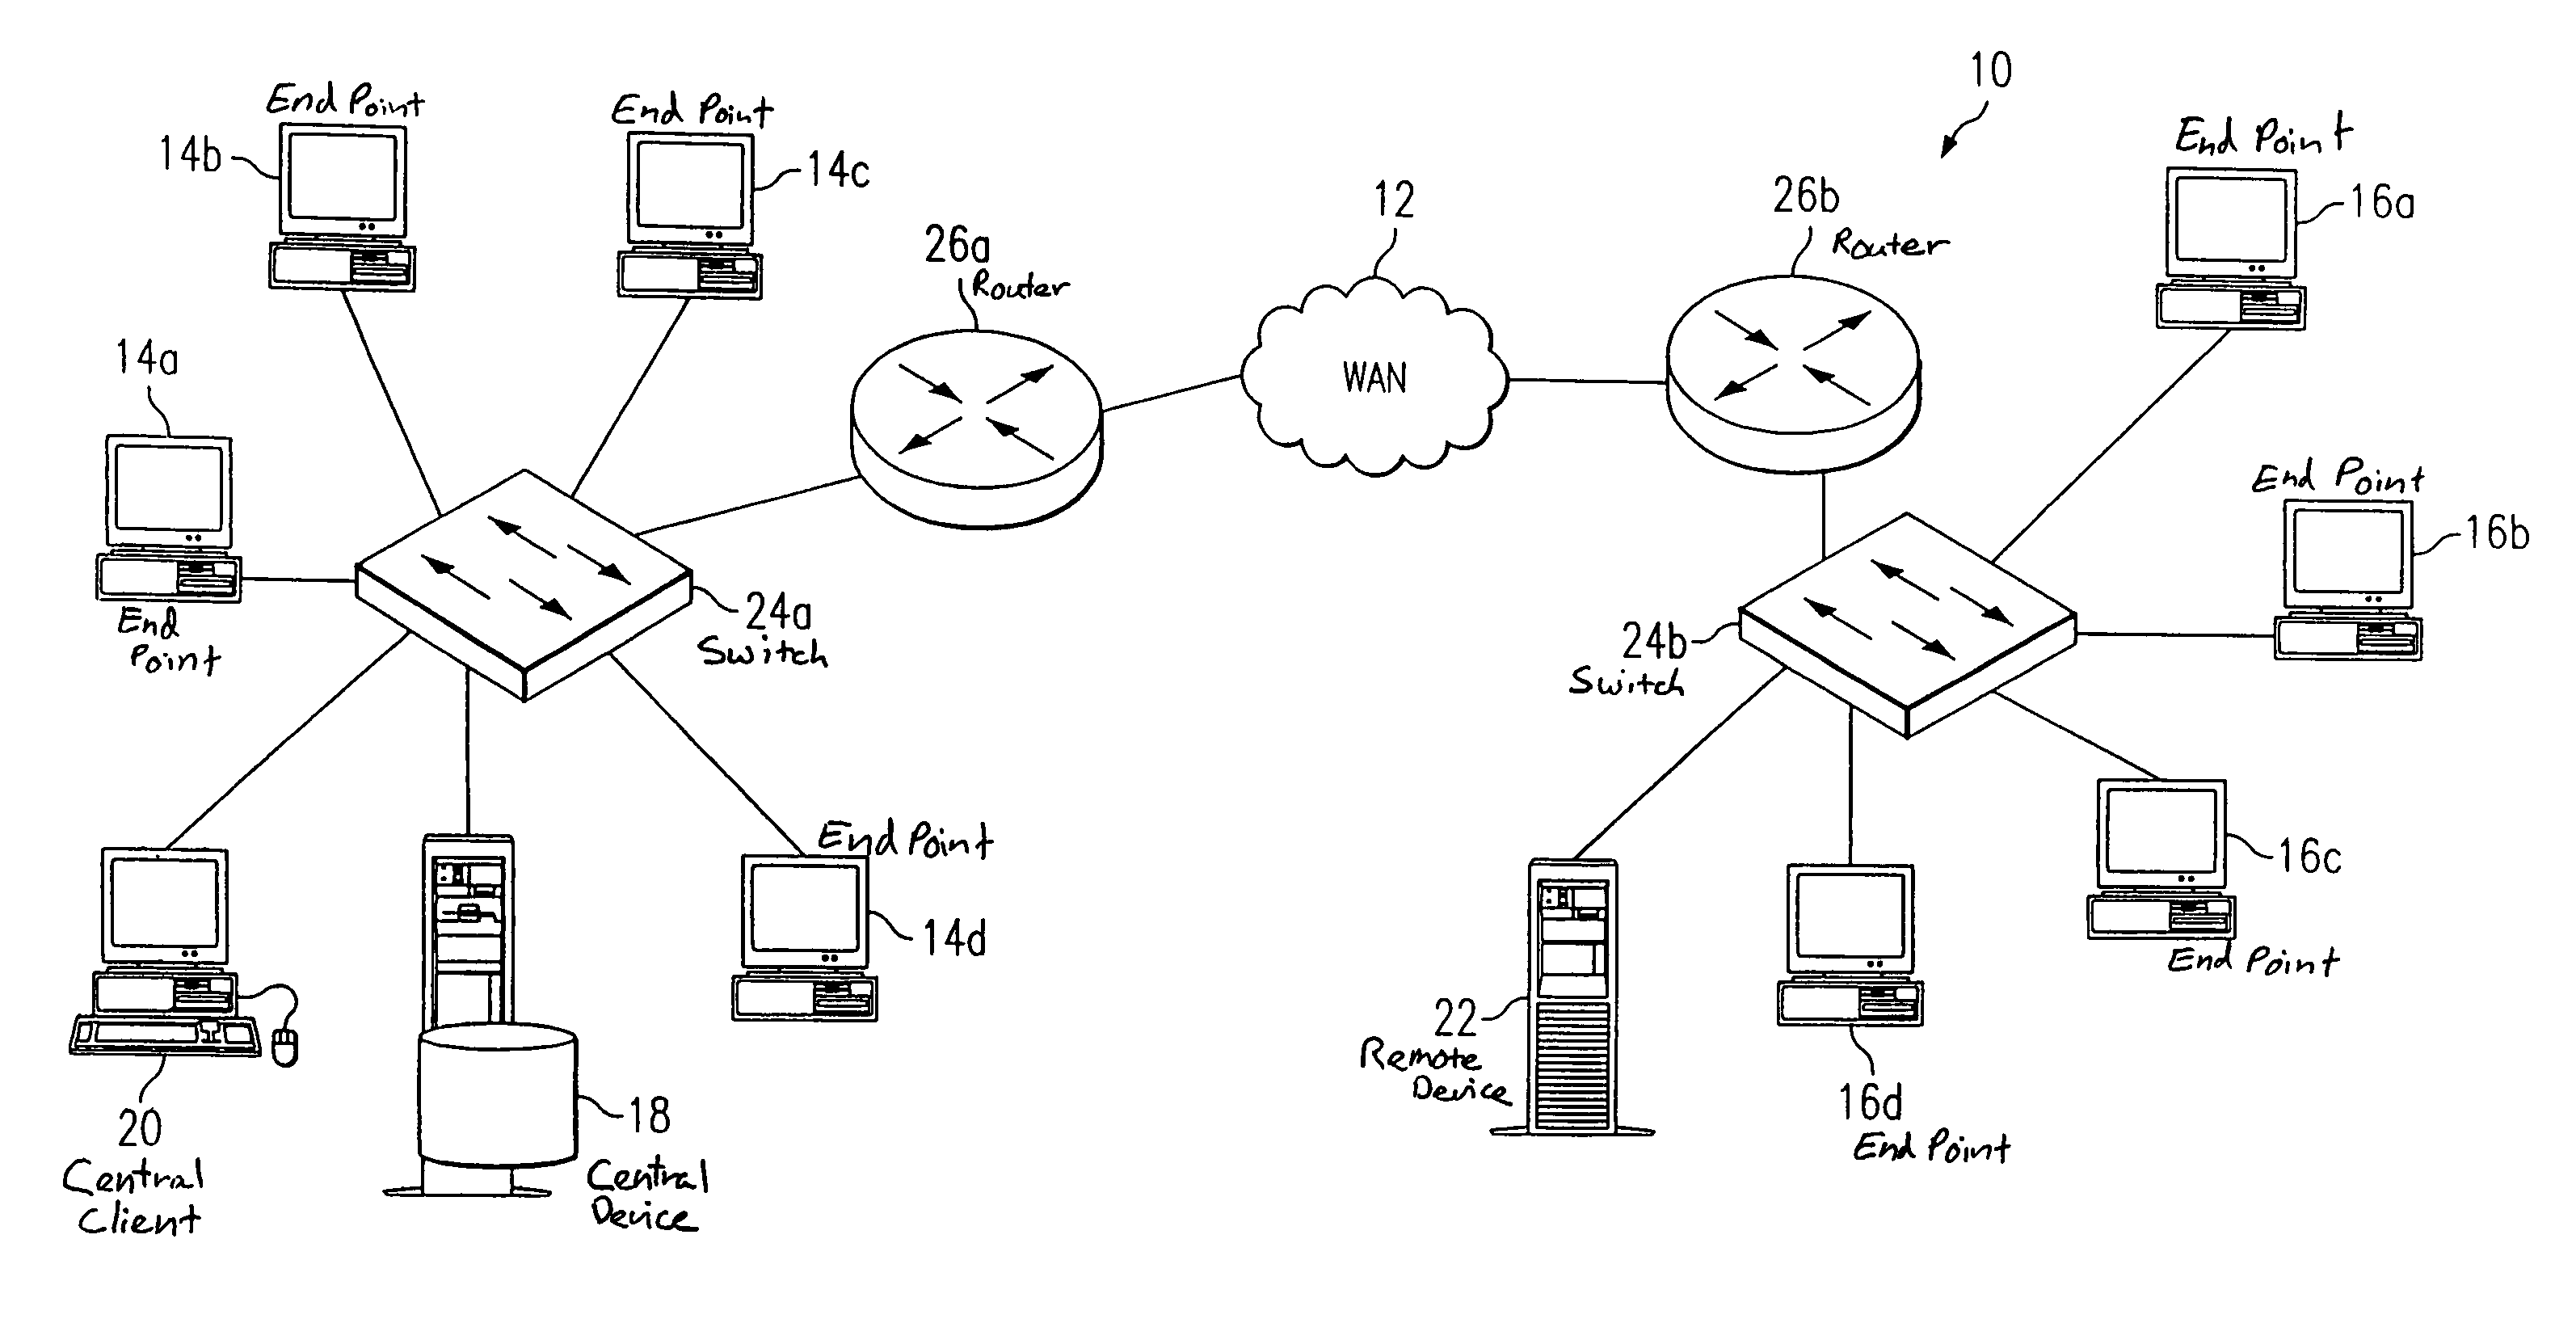 System and method for identifying errors in a video conference conducted on a packet-based network